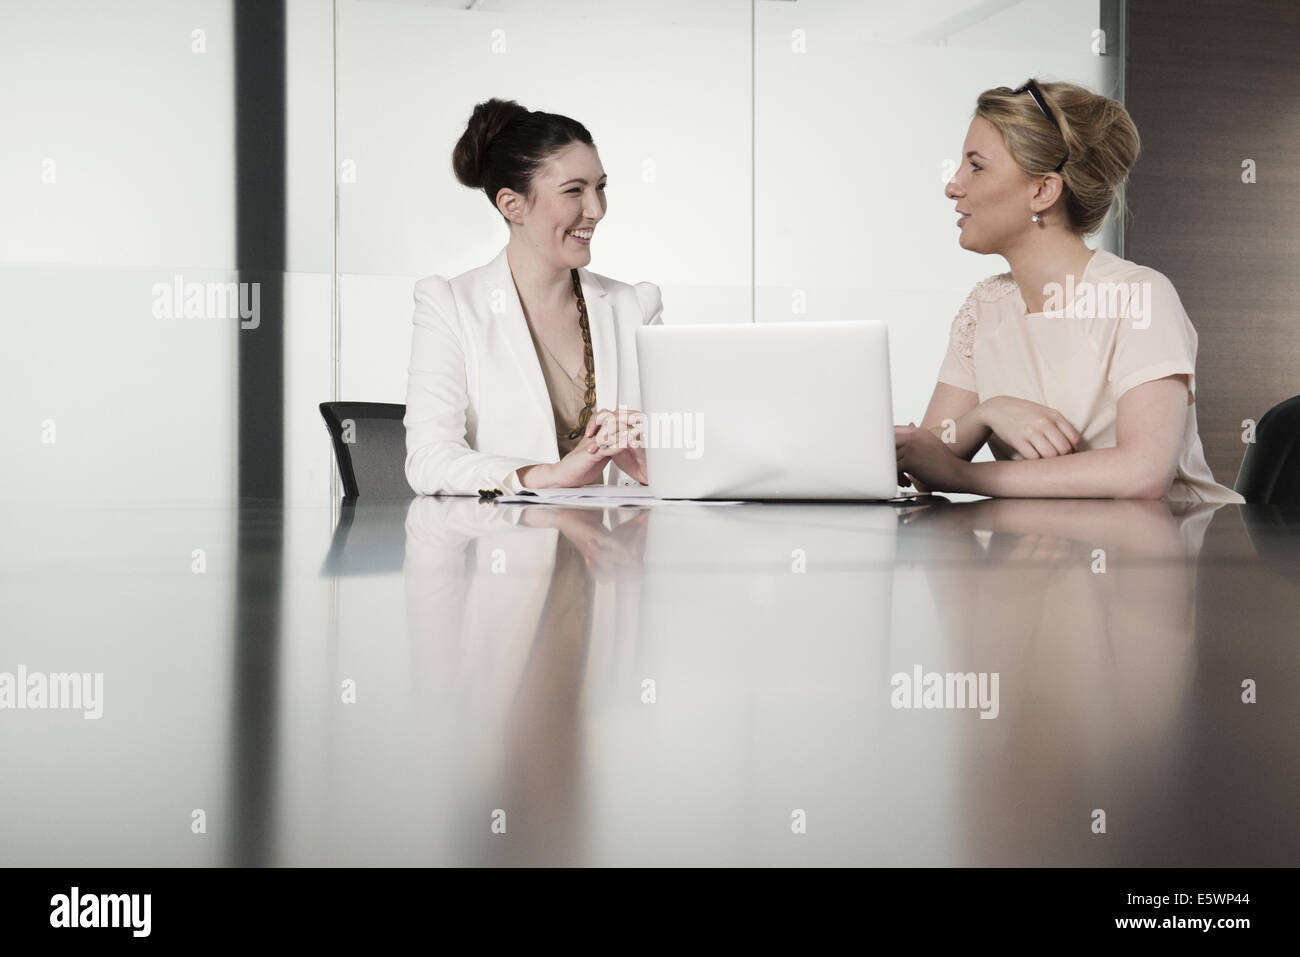 Two young businesswomen having face to face meeting in conference room Stock Photo